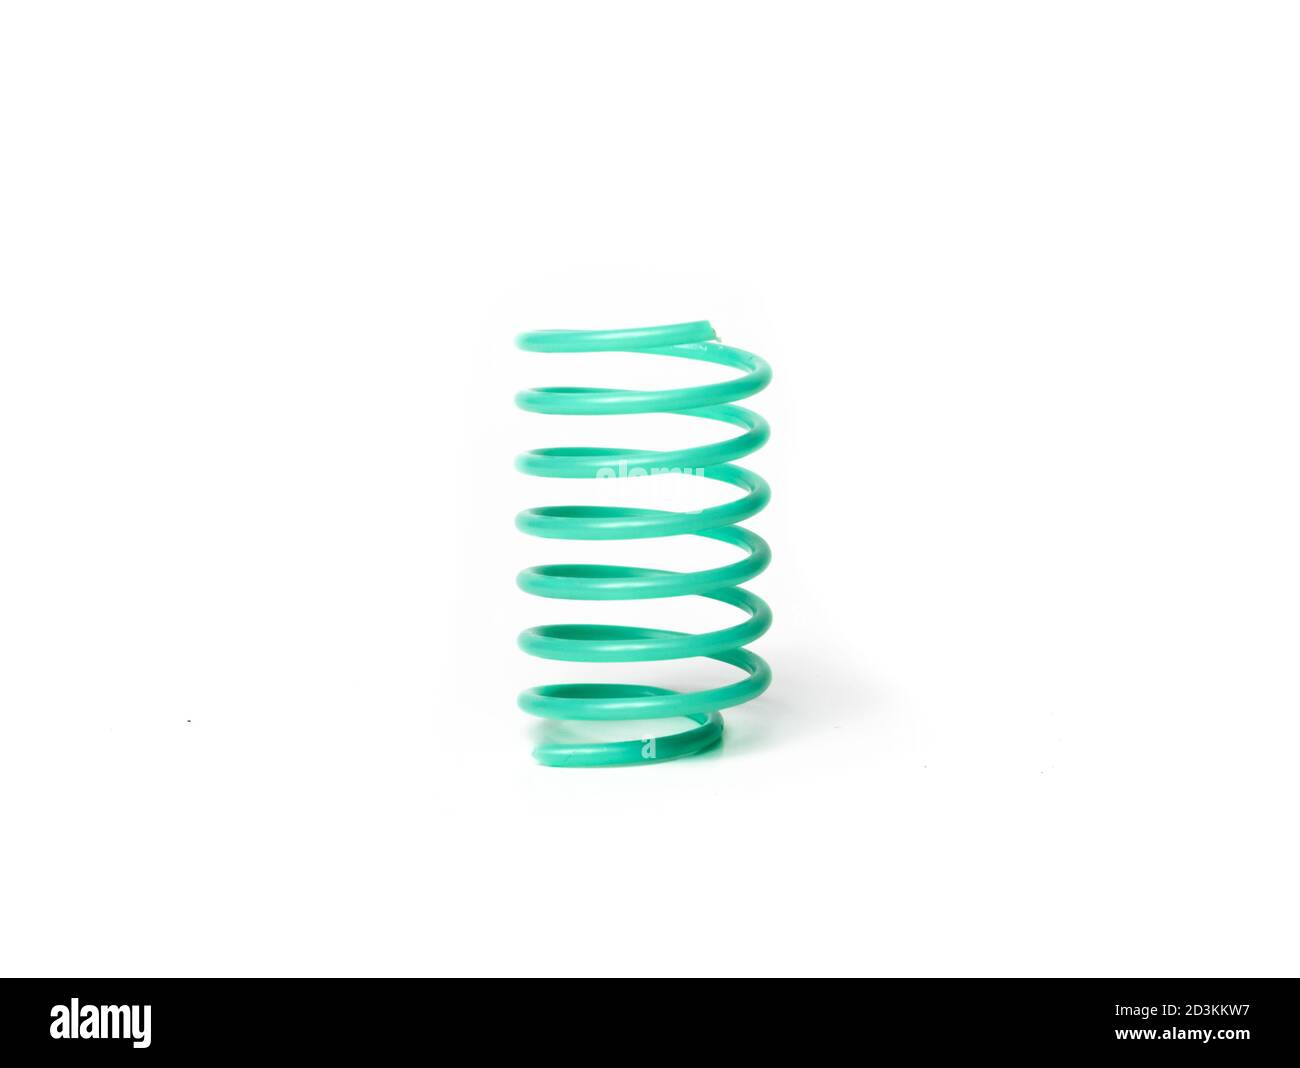 Small plastic spring. Can be used as cat toy. Concept for catch and grab play with kitten to improve natural hunting skills. Isolated on white. Stock Photo